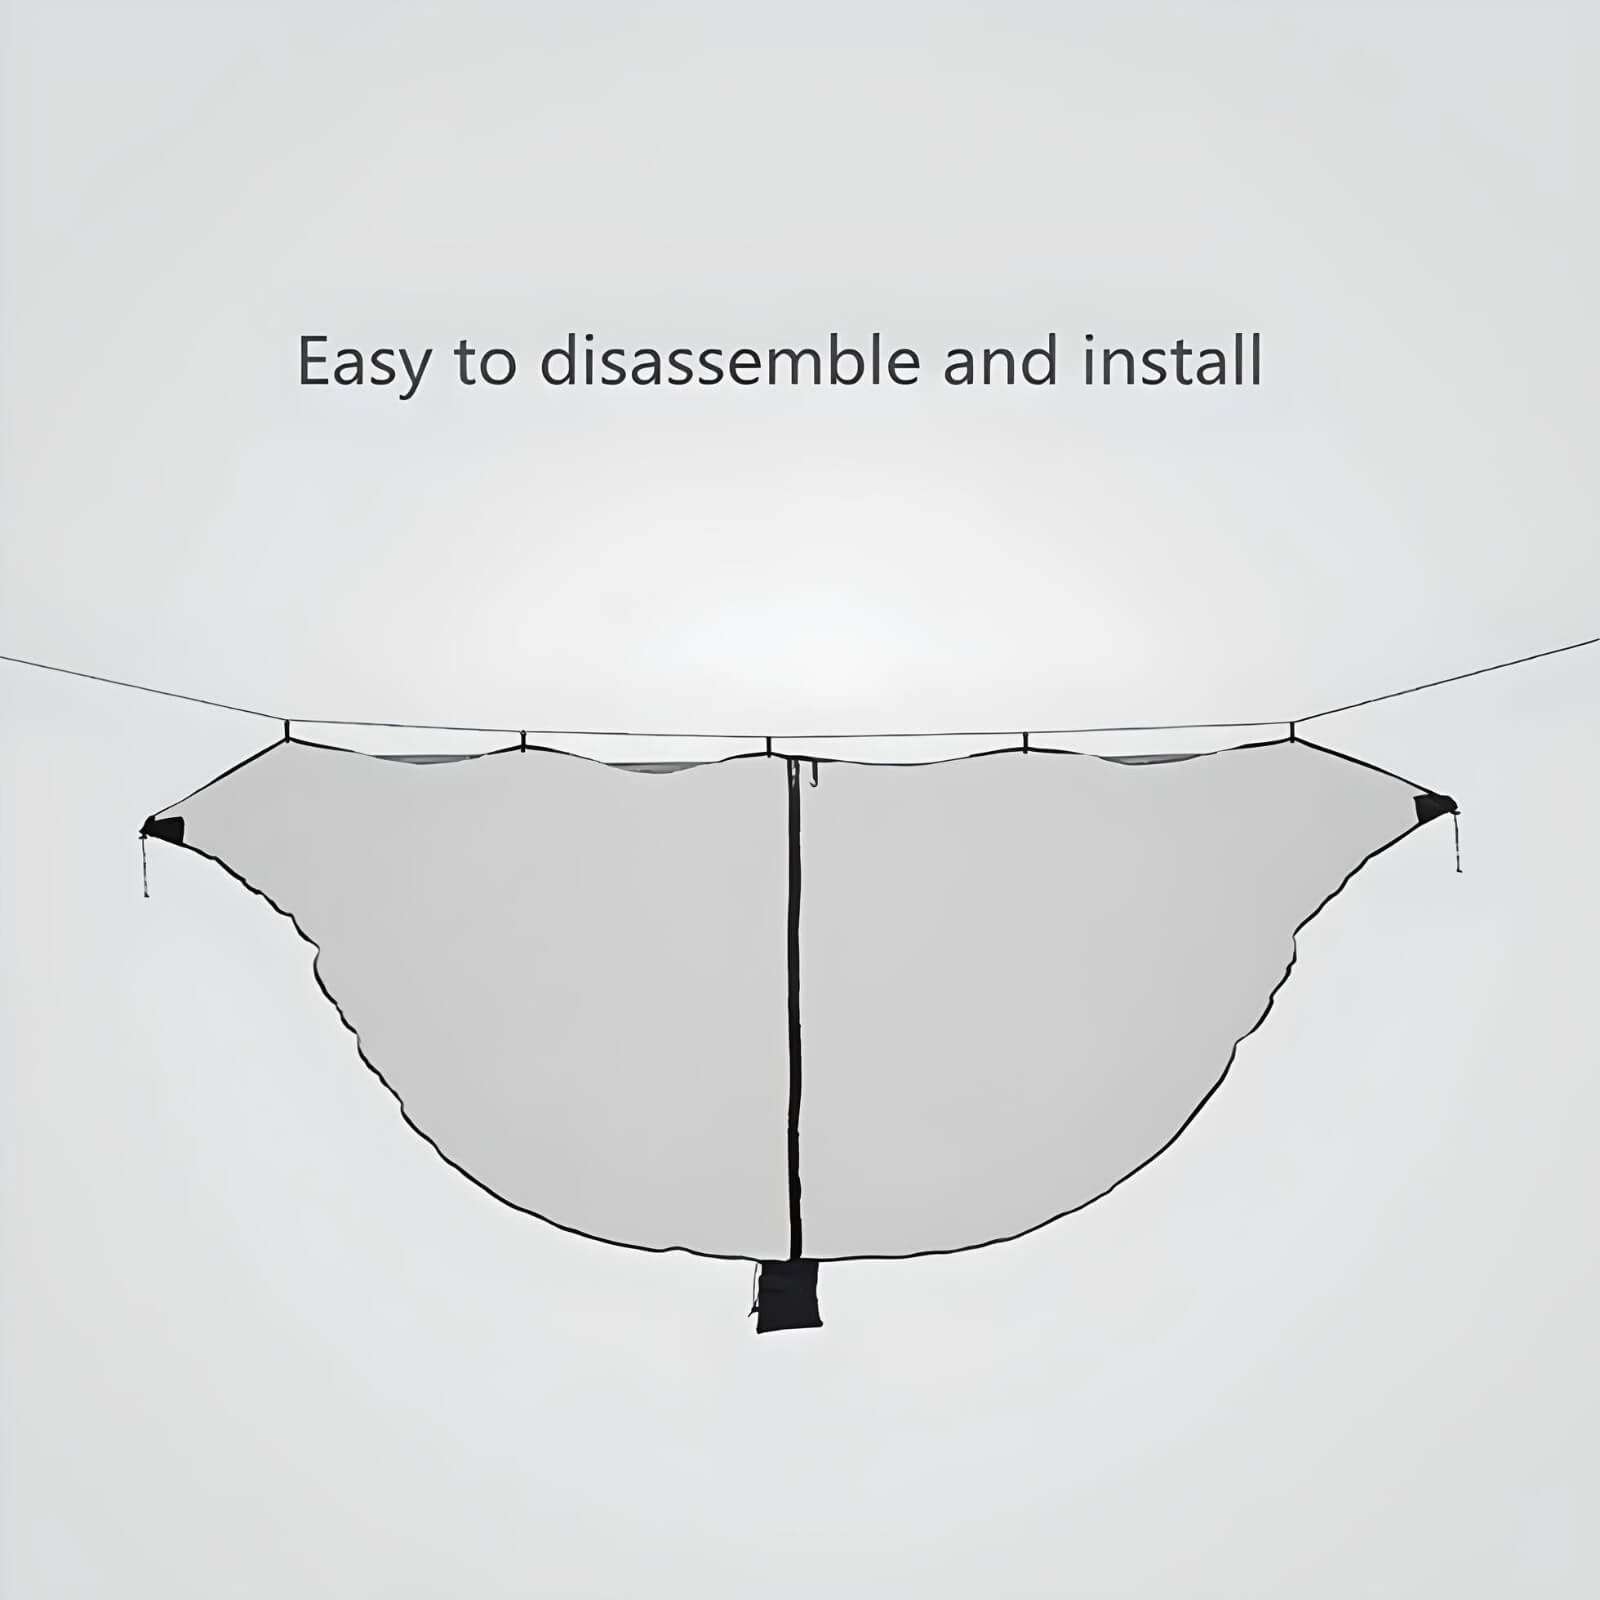 hammock-with-bug-screen-easy-to-disassemble